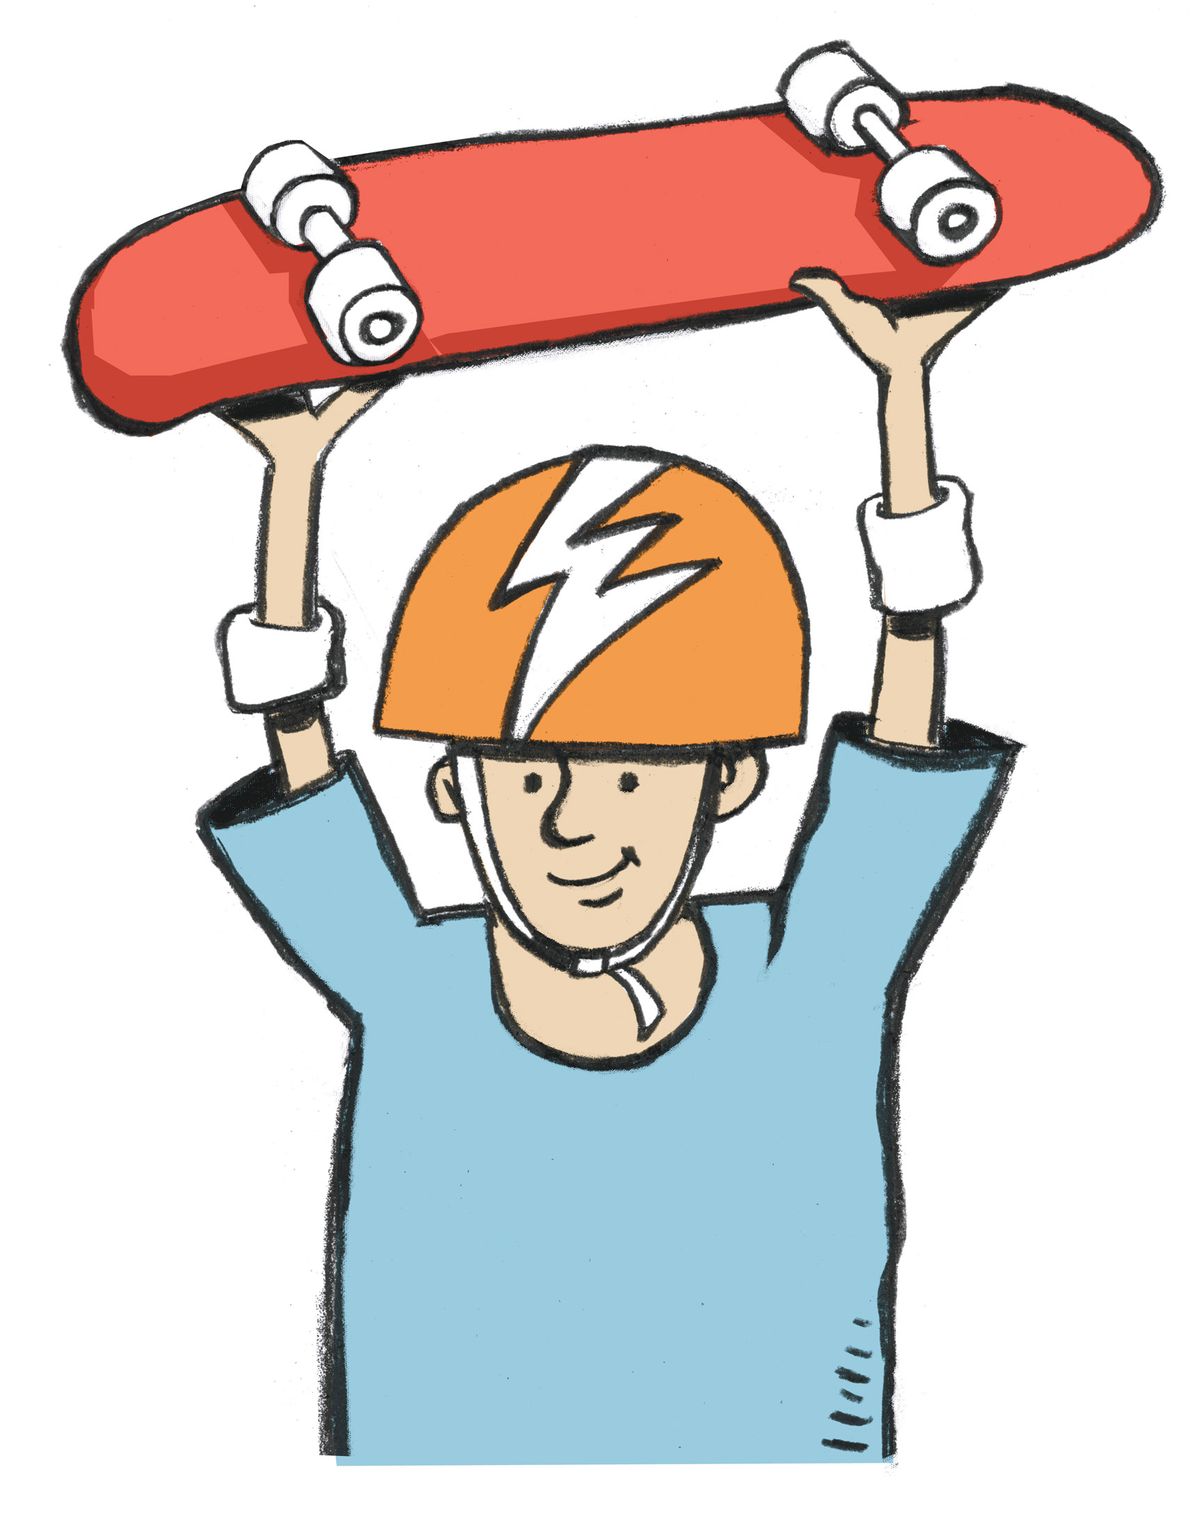 300 dpi Sharon Kilday color illustration of a young kid, wearing a helmet and holding a skateboard over his head. Dallas Morning News 2007  (Sharon Kilday/Dallas Morning News)